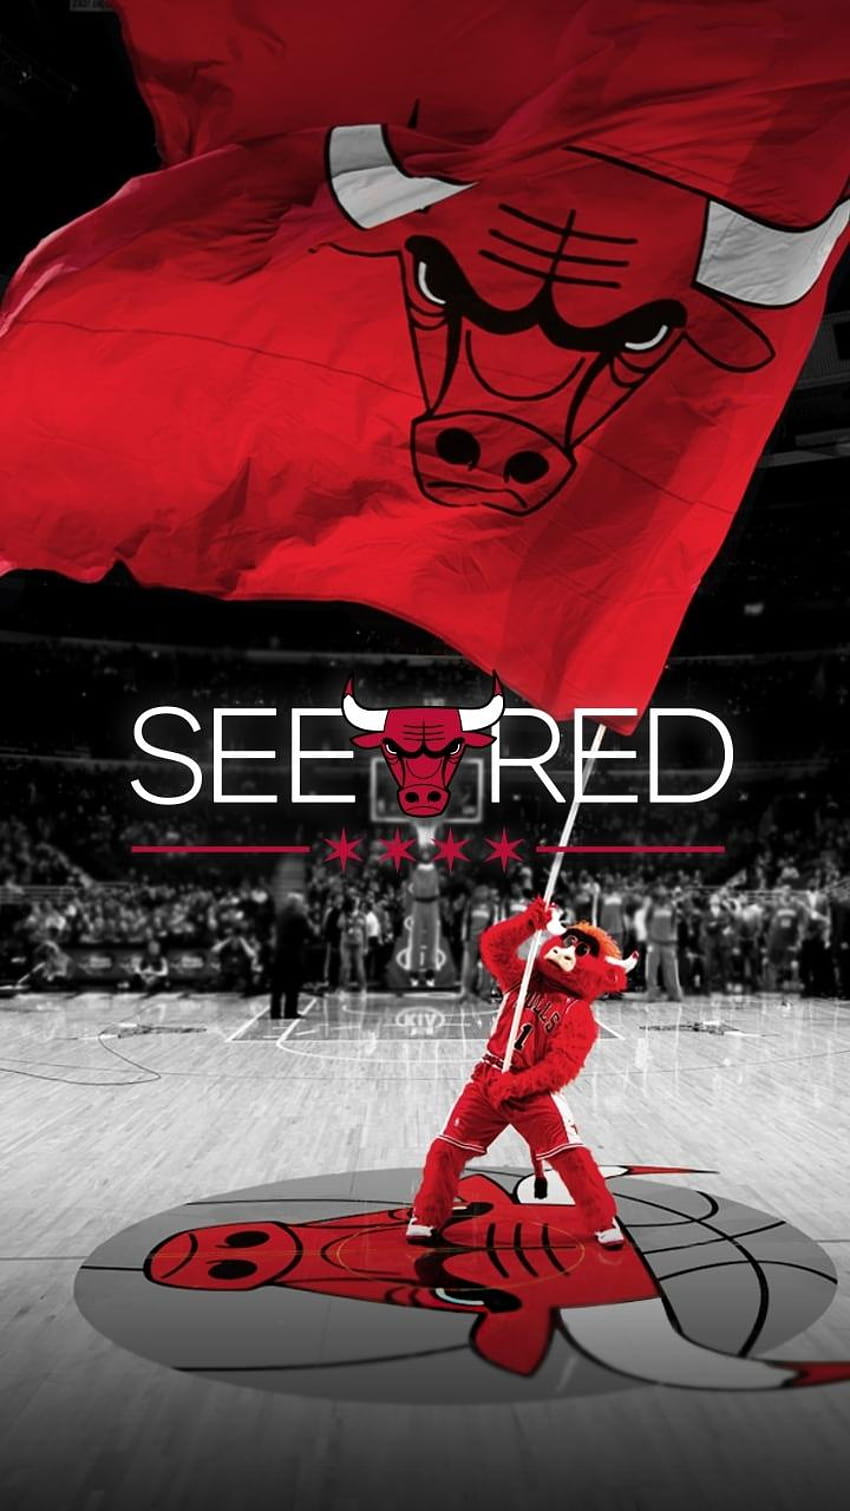 Latest Chicago Bulls For Android Full, chicago bulls red iphone HD phone wallpaper